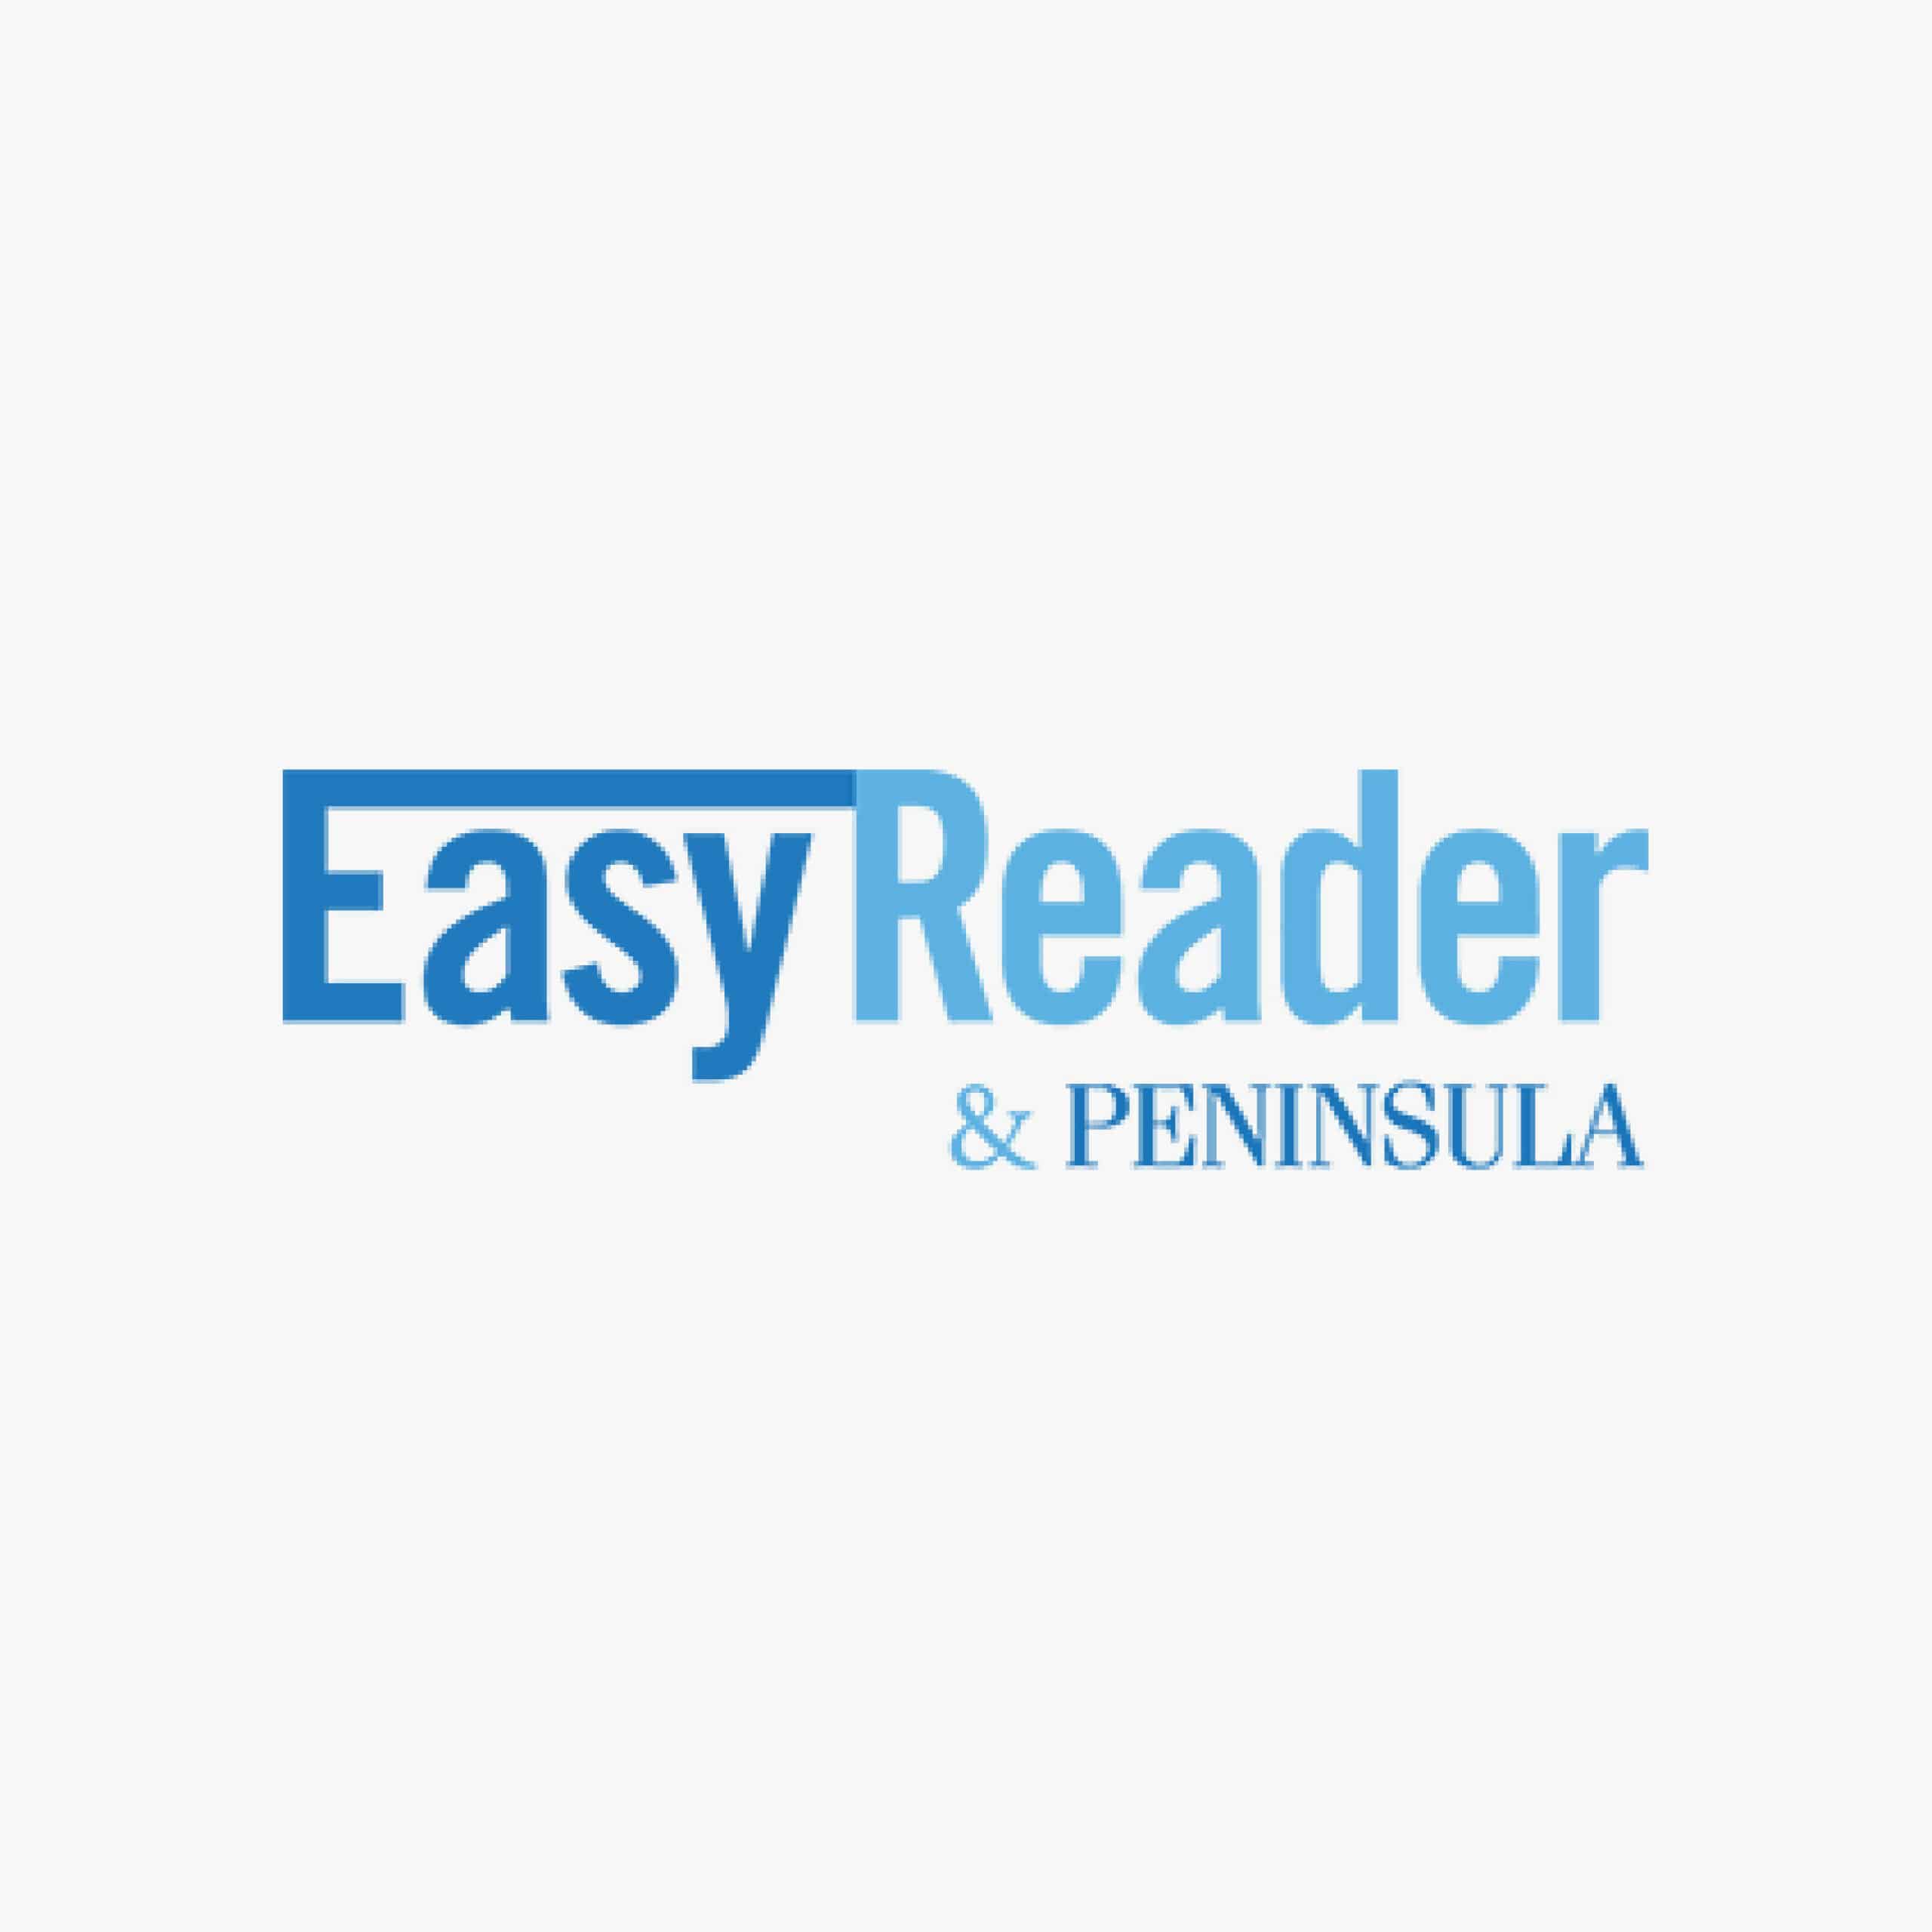 Easy Reader Article Feature the Redondo Beach Logo Re-deisgn project by Jordis Small and Stellen Design Logo Design agency in Los Angeles California